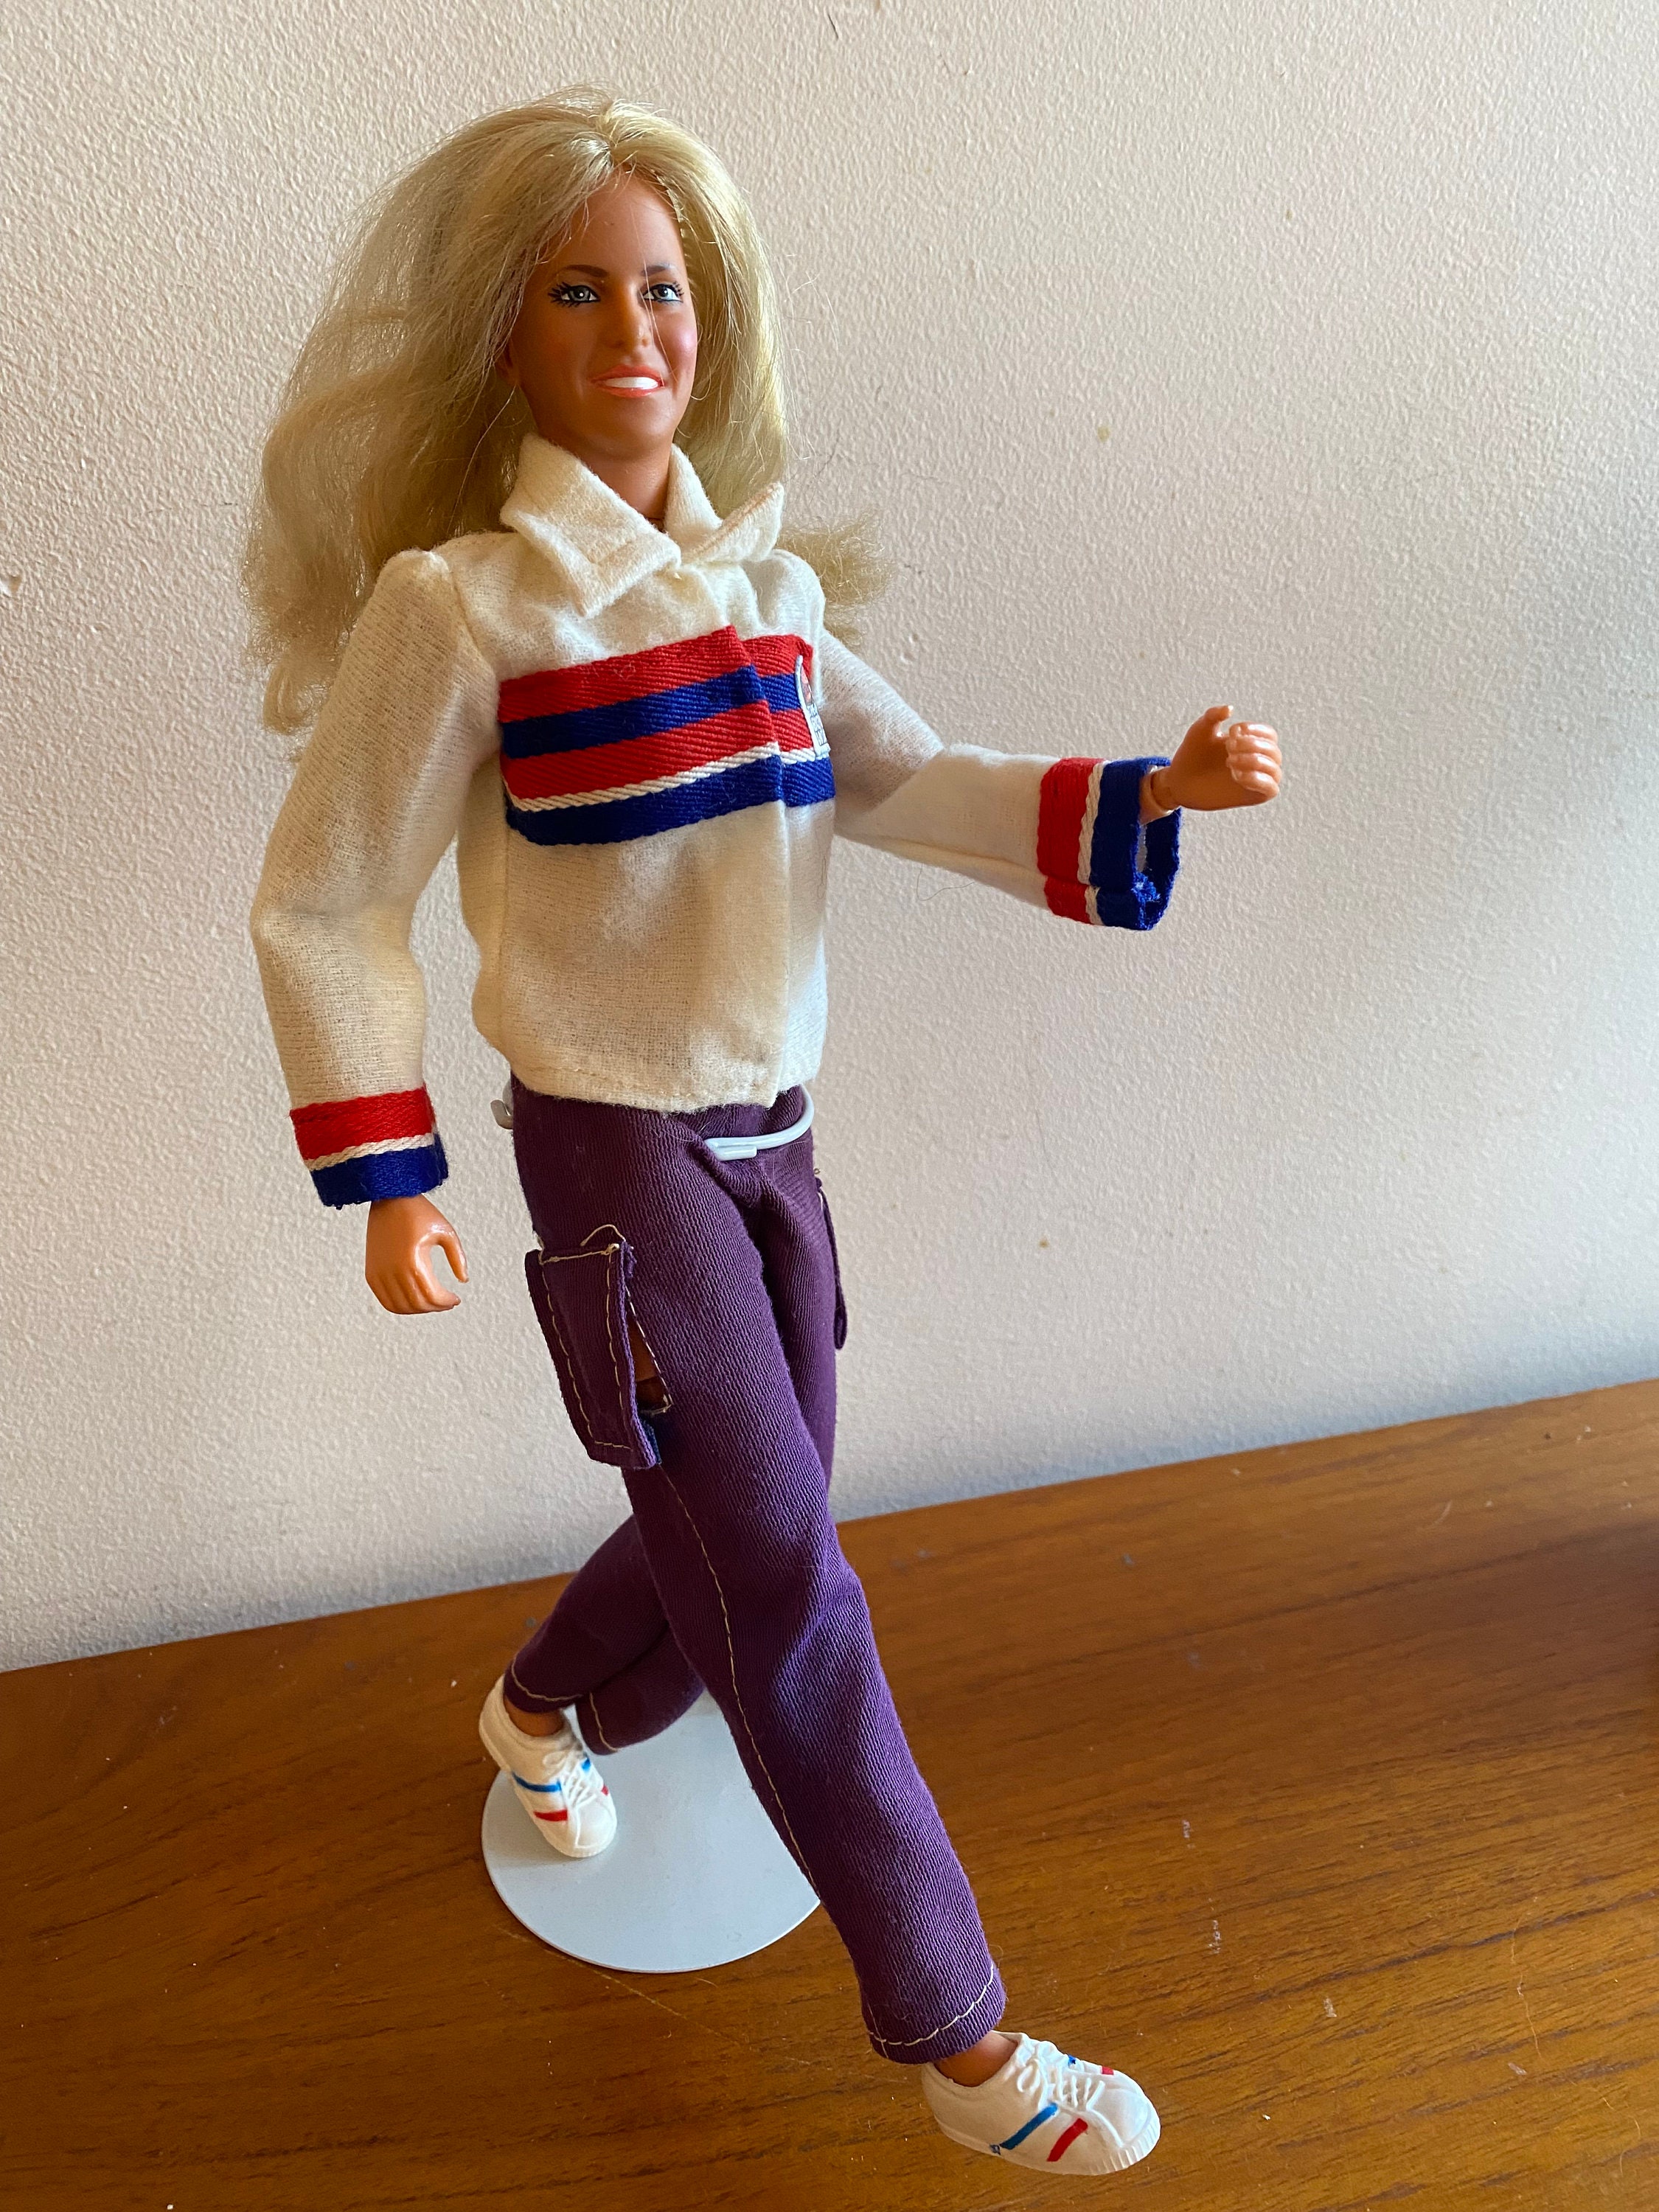 Vintage Bionic Woman Doll, First Version, Kenner, Action Figure, Jaime  Sommers, 1974 